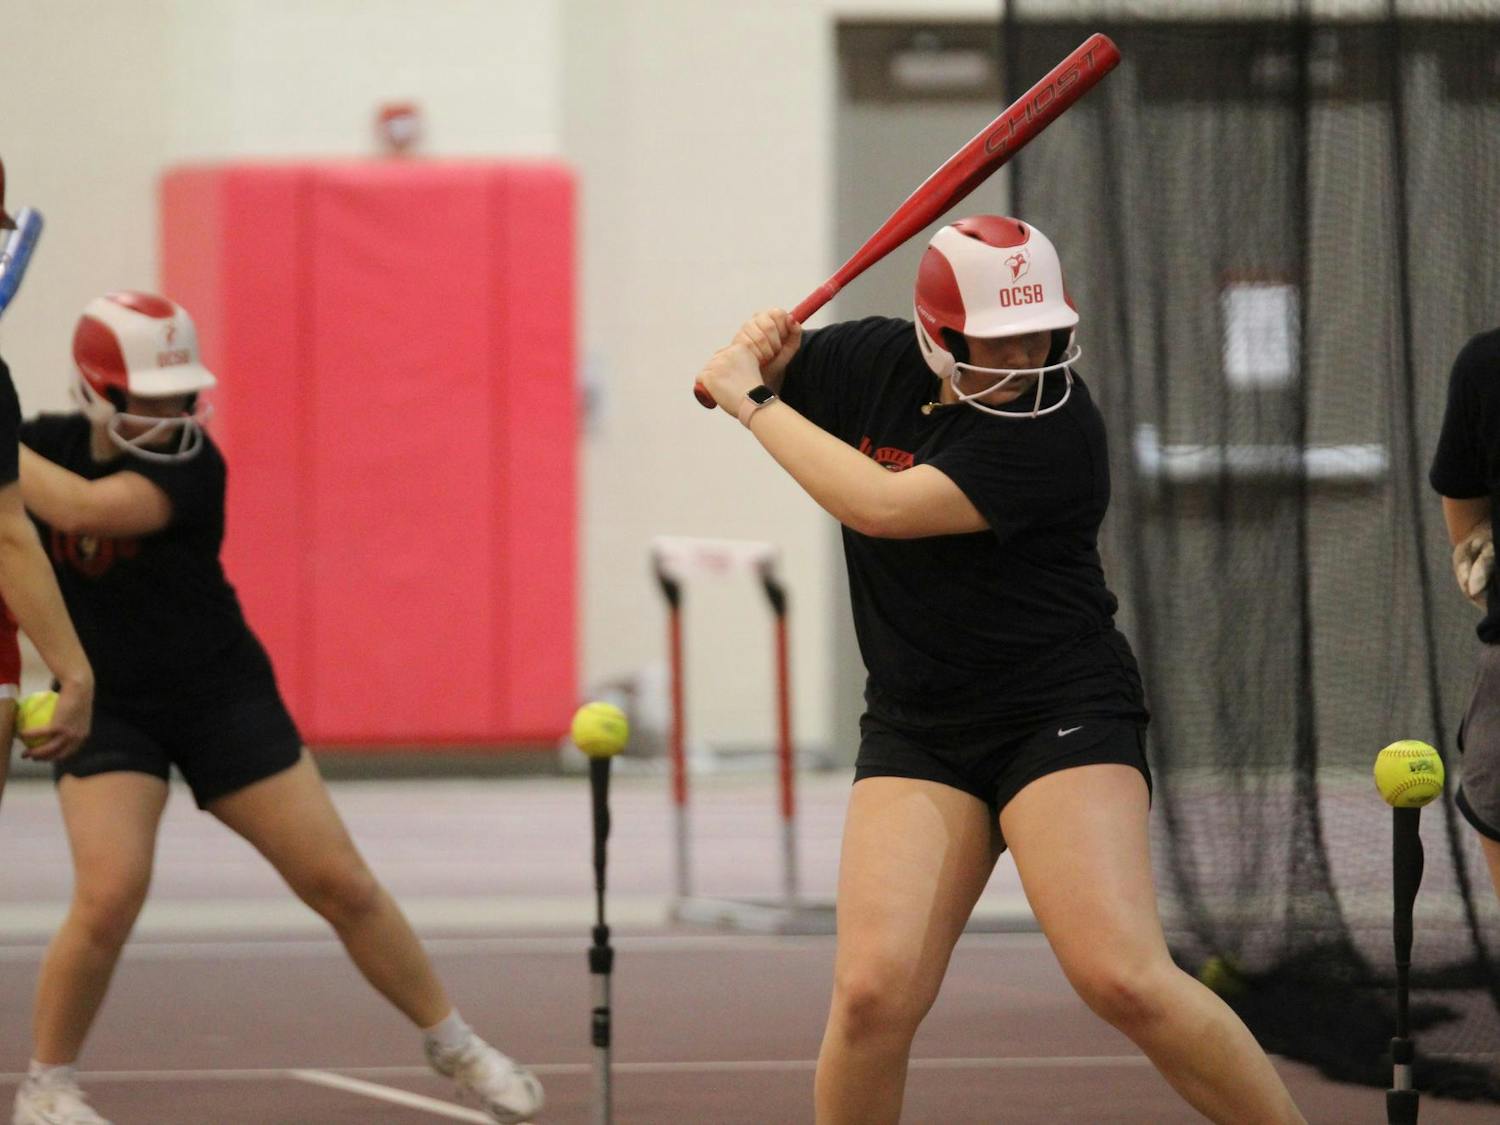 Otterbein softball players taking practice swings off tees before the upcoming season begins.